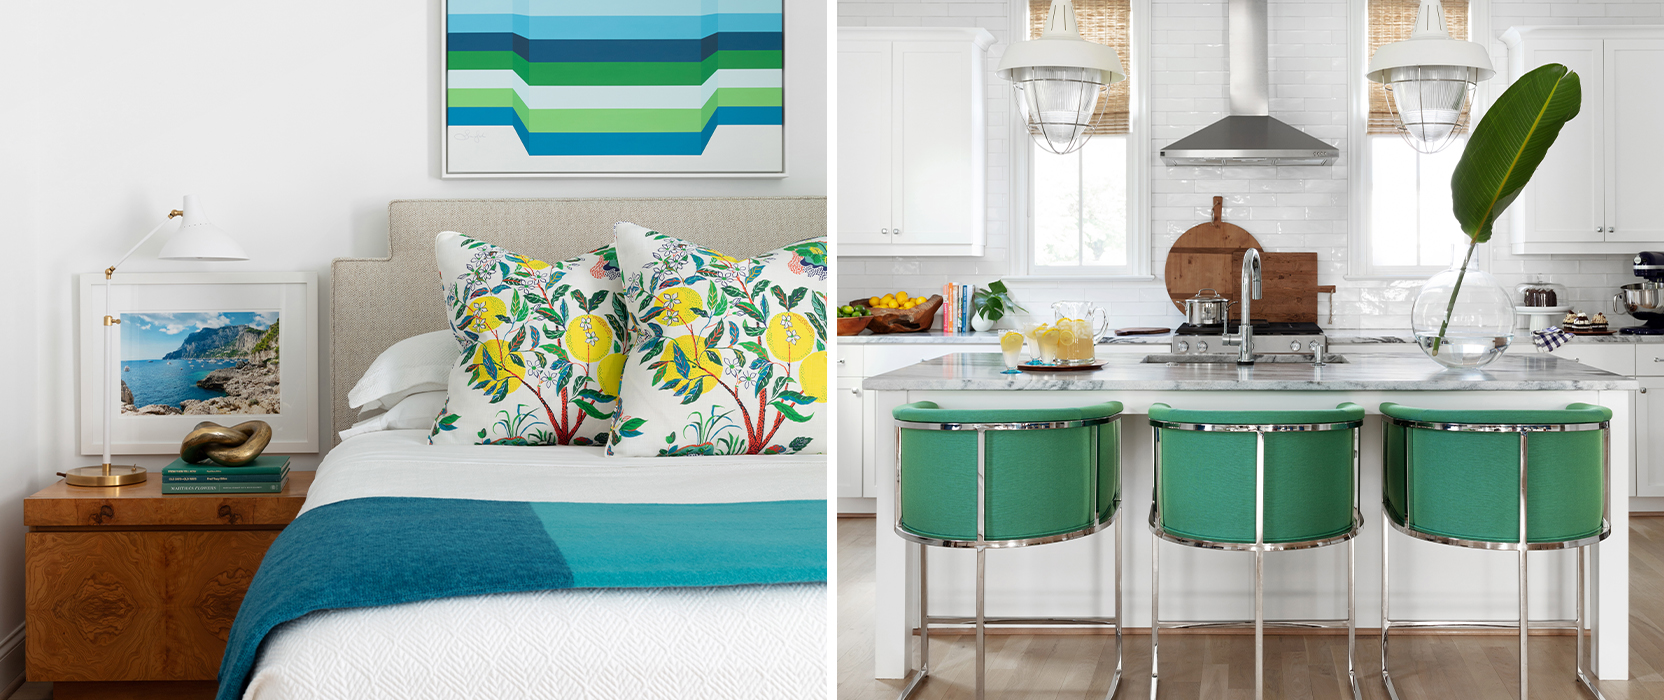 Left image: Bedroom with tropical blue accents, botanical printed throw pillows, and vintage style wood nightstand. Right image: White kitchen with teal accent chairs at kitchen island.